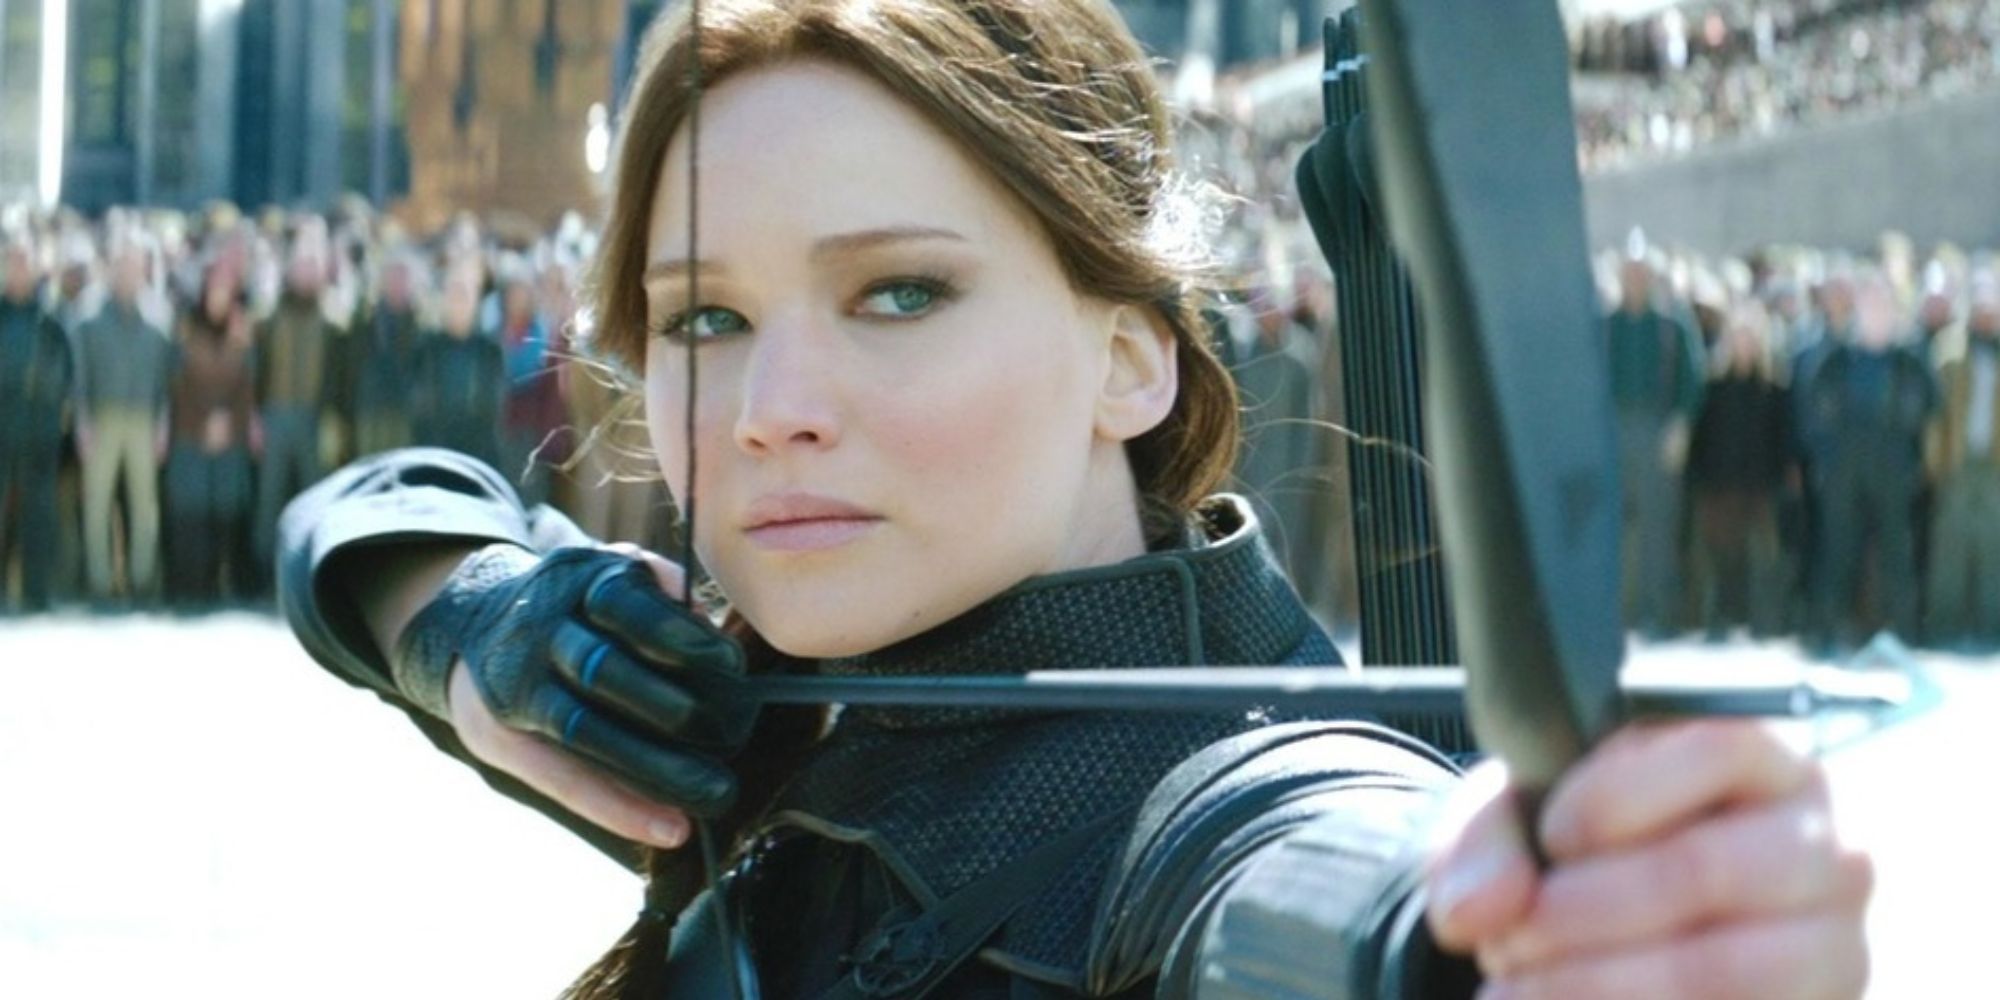 Katniss Everdeen aiming her bow and arrow at something off-camera in 'The Hunger Games'